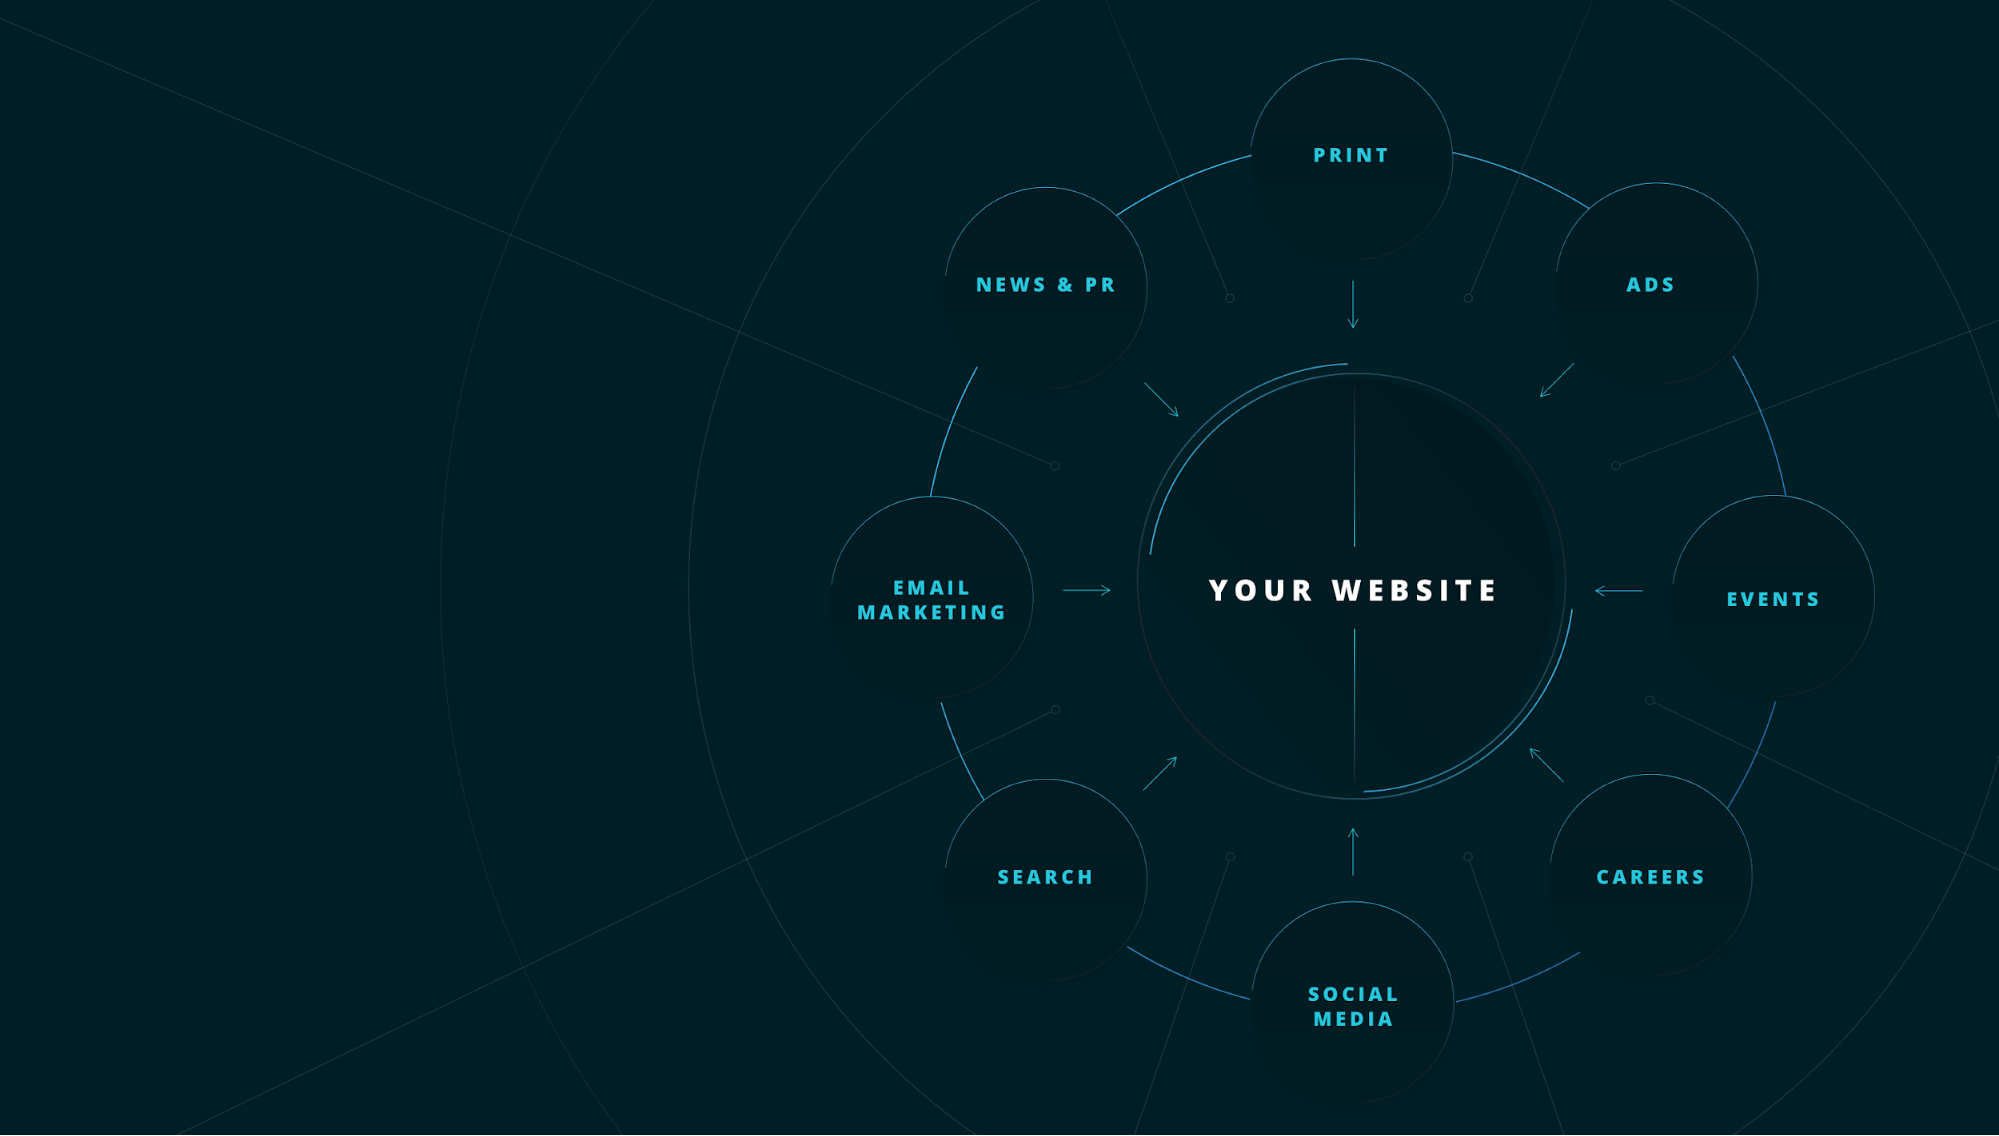 A website illustrated as a marketing hub